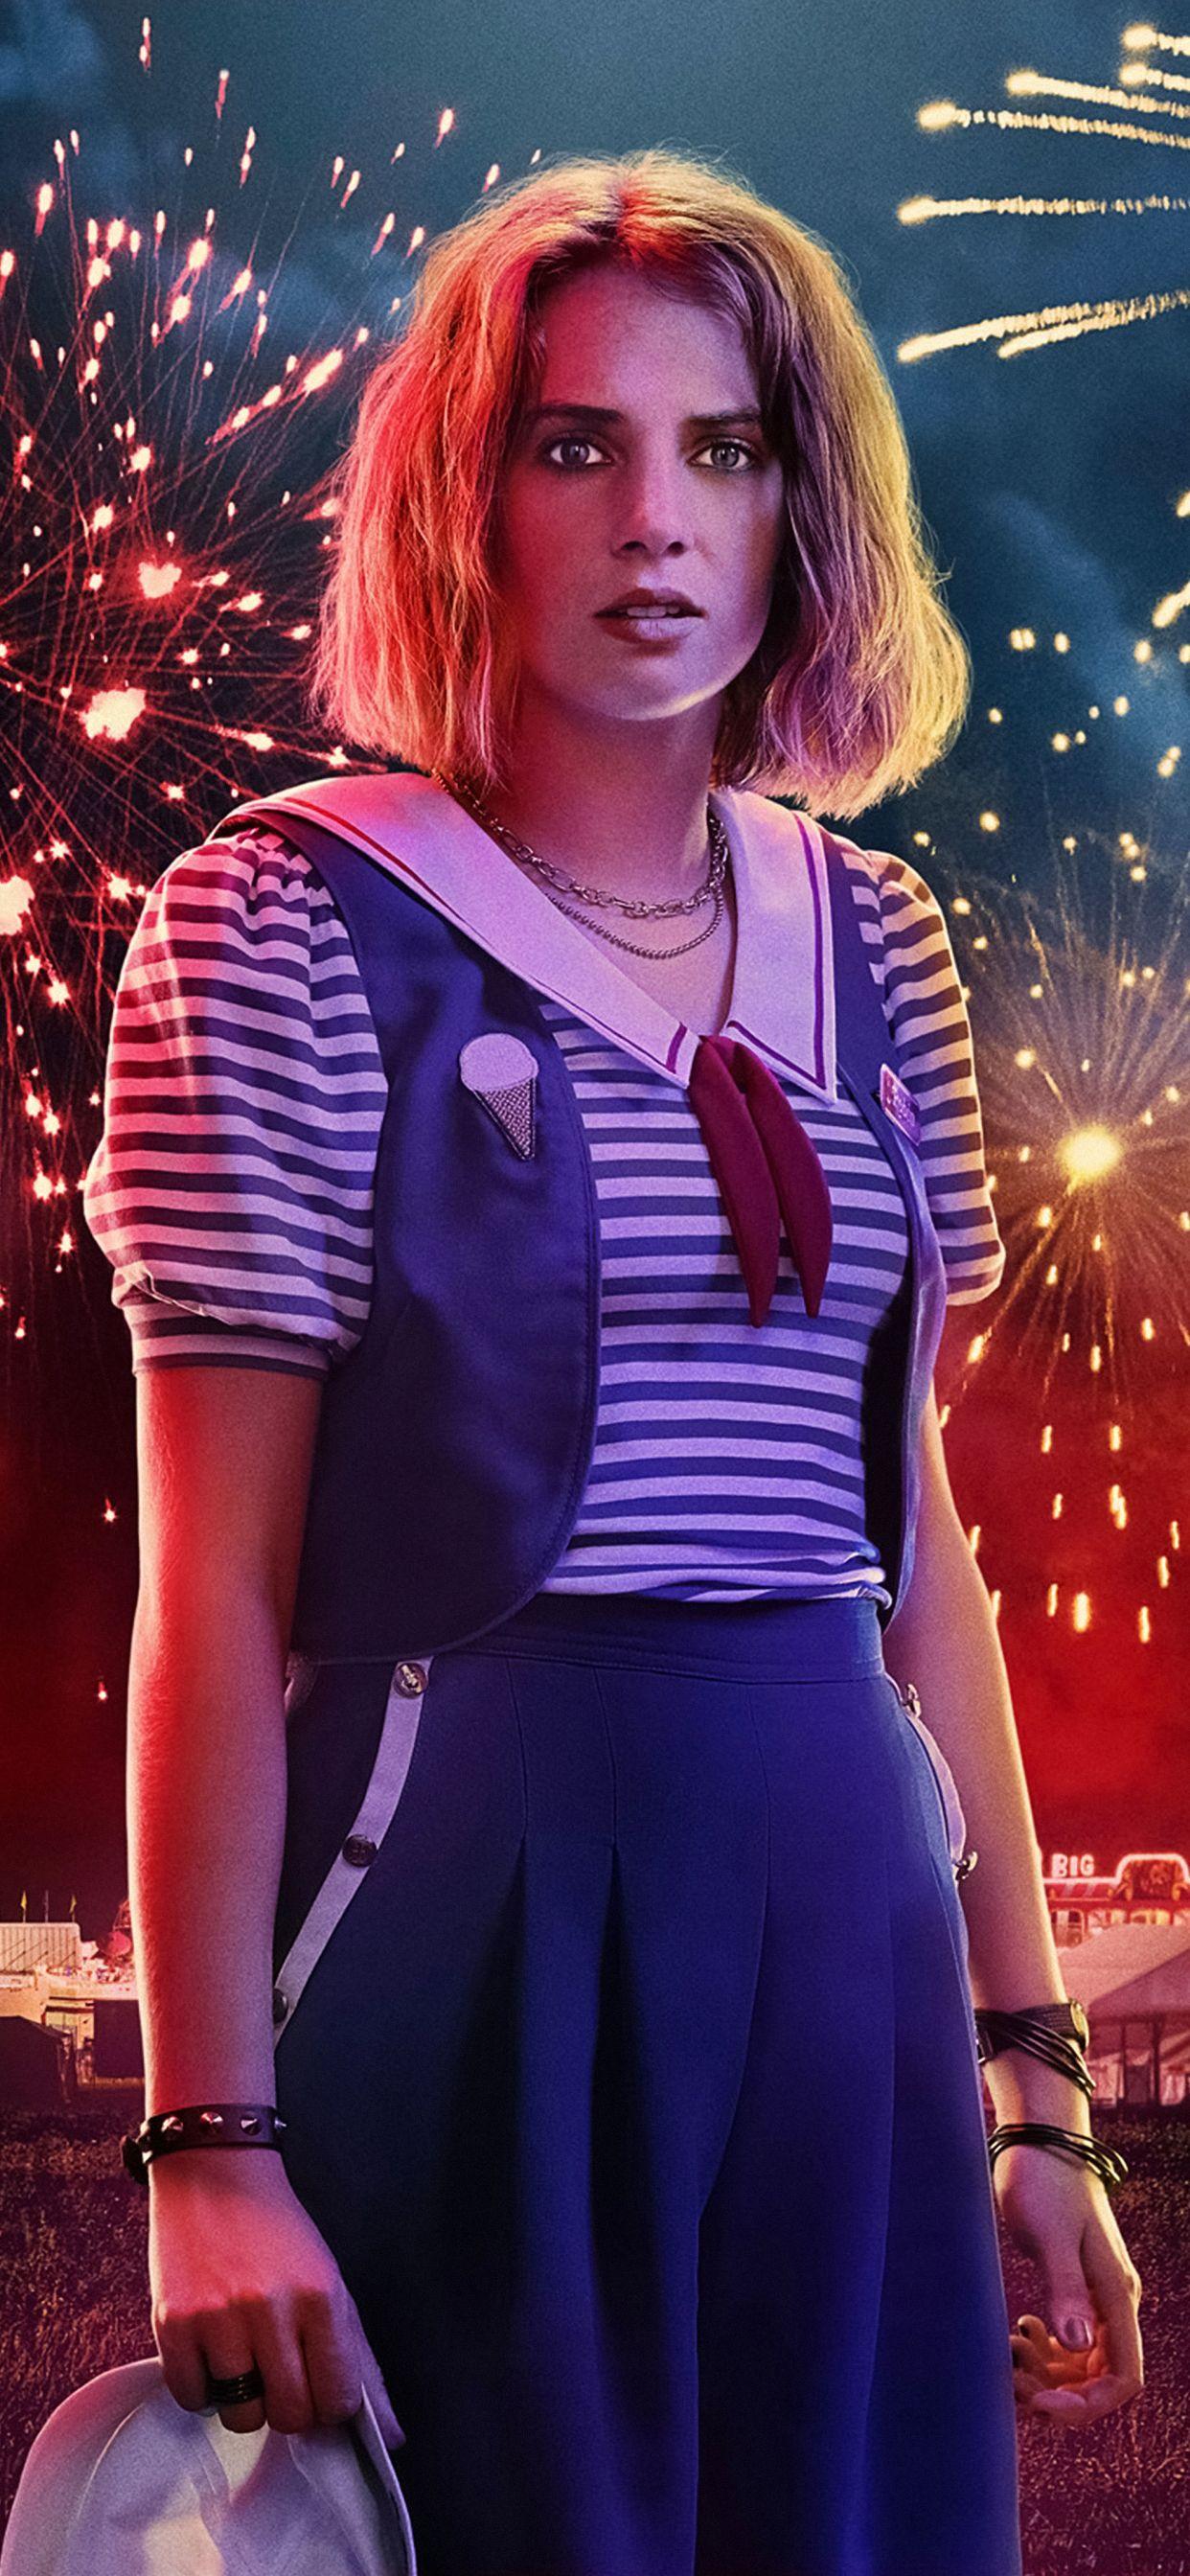 Amazing stranger things for the iphonex iPhone Wallpapers Free Download